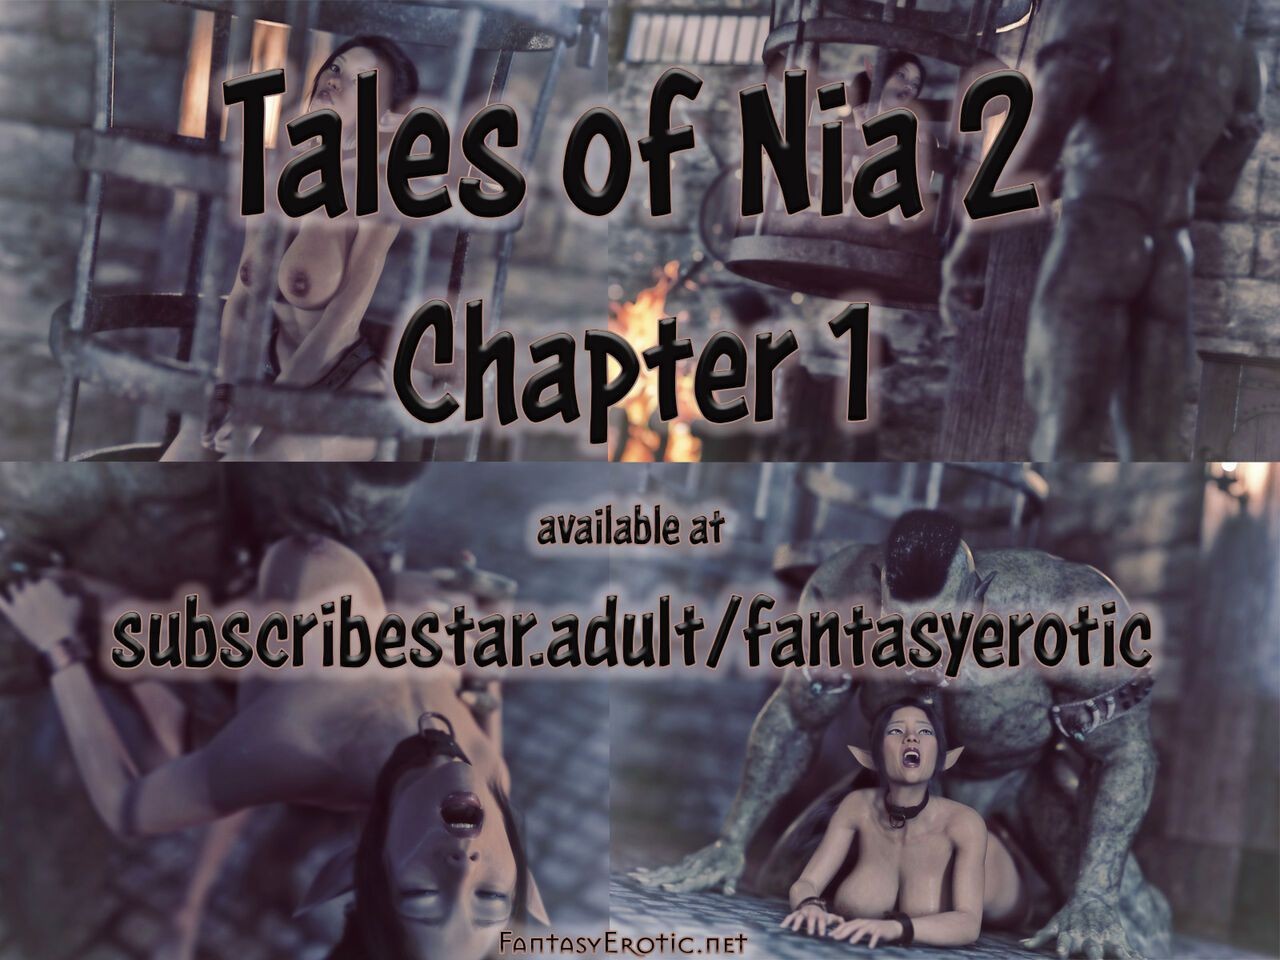 Free Blowjob [Dionysos] [3D] Tales Of Nia 2 - Chapter 1 Hardcore